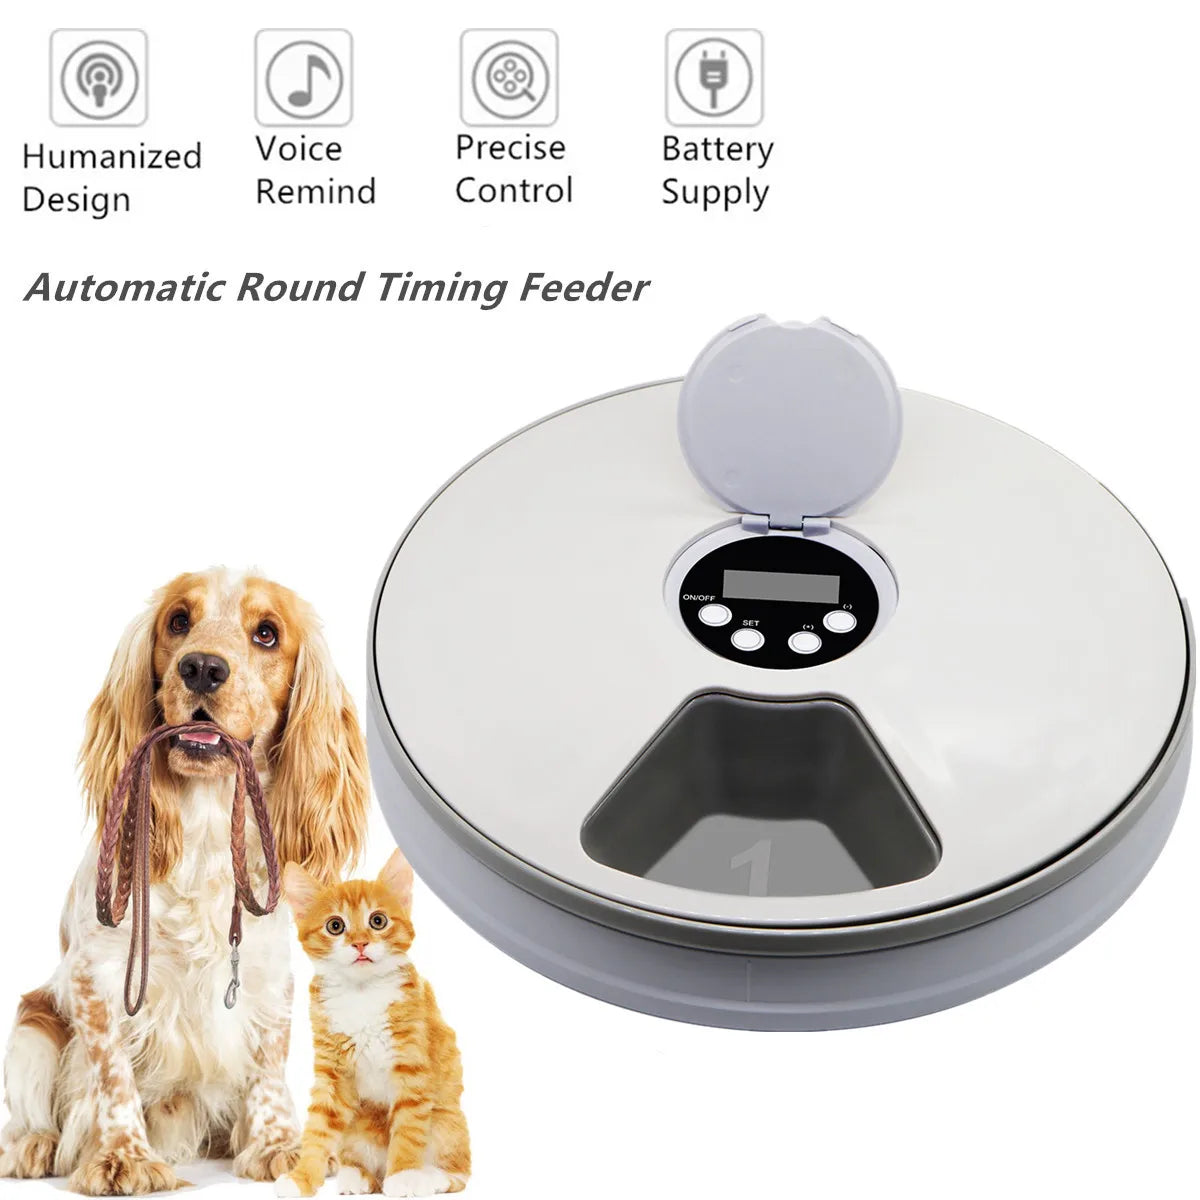 Automatic Round Timing Feeder - easynow.com